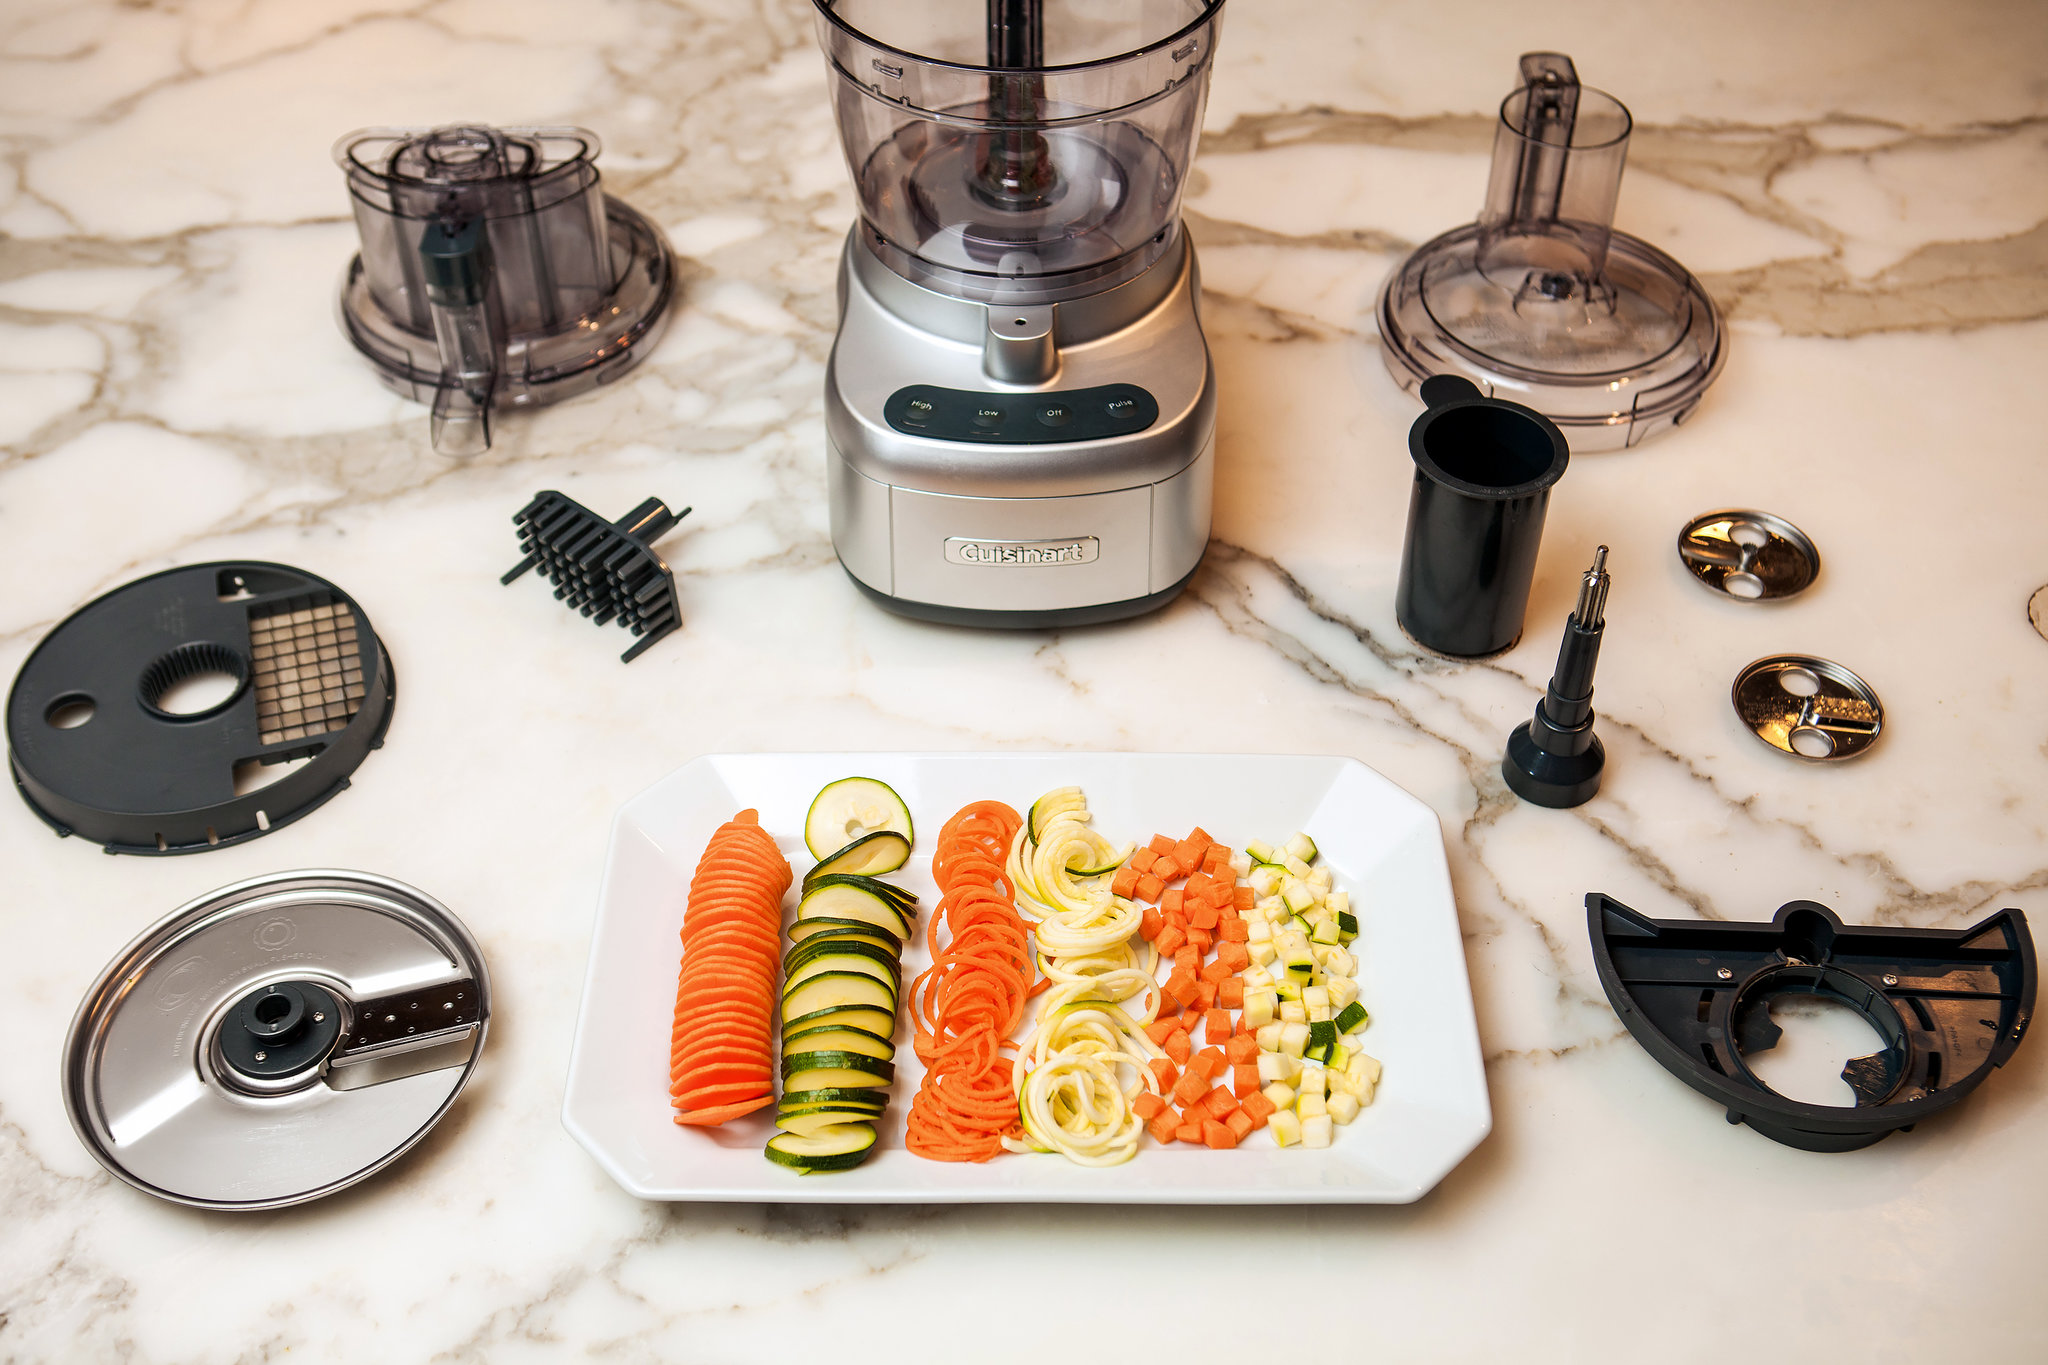 How To Operate A Cuisinart Food Processor